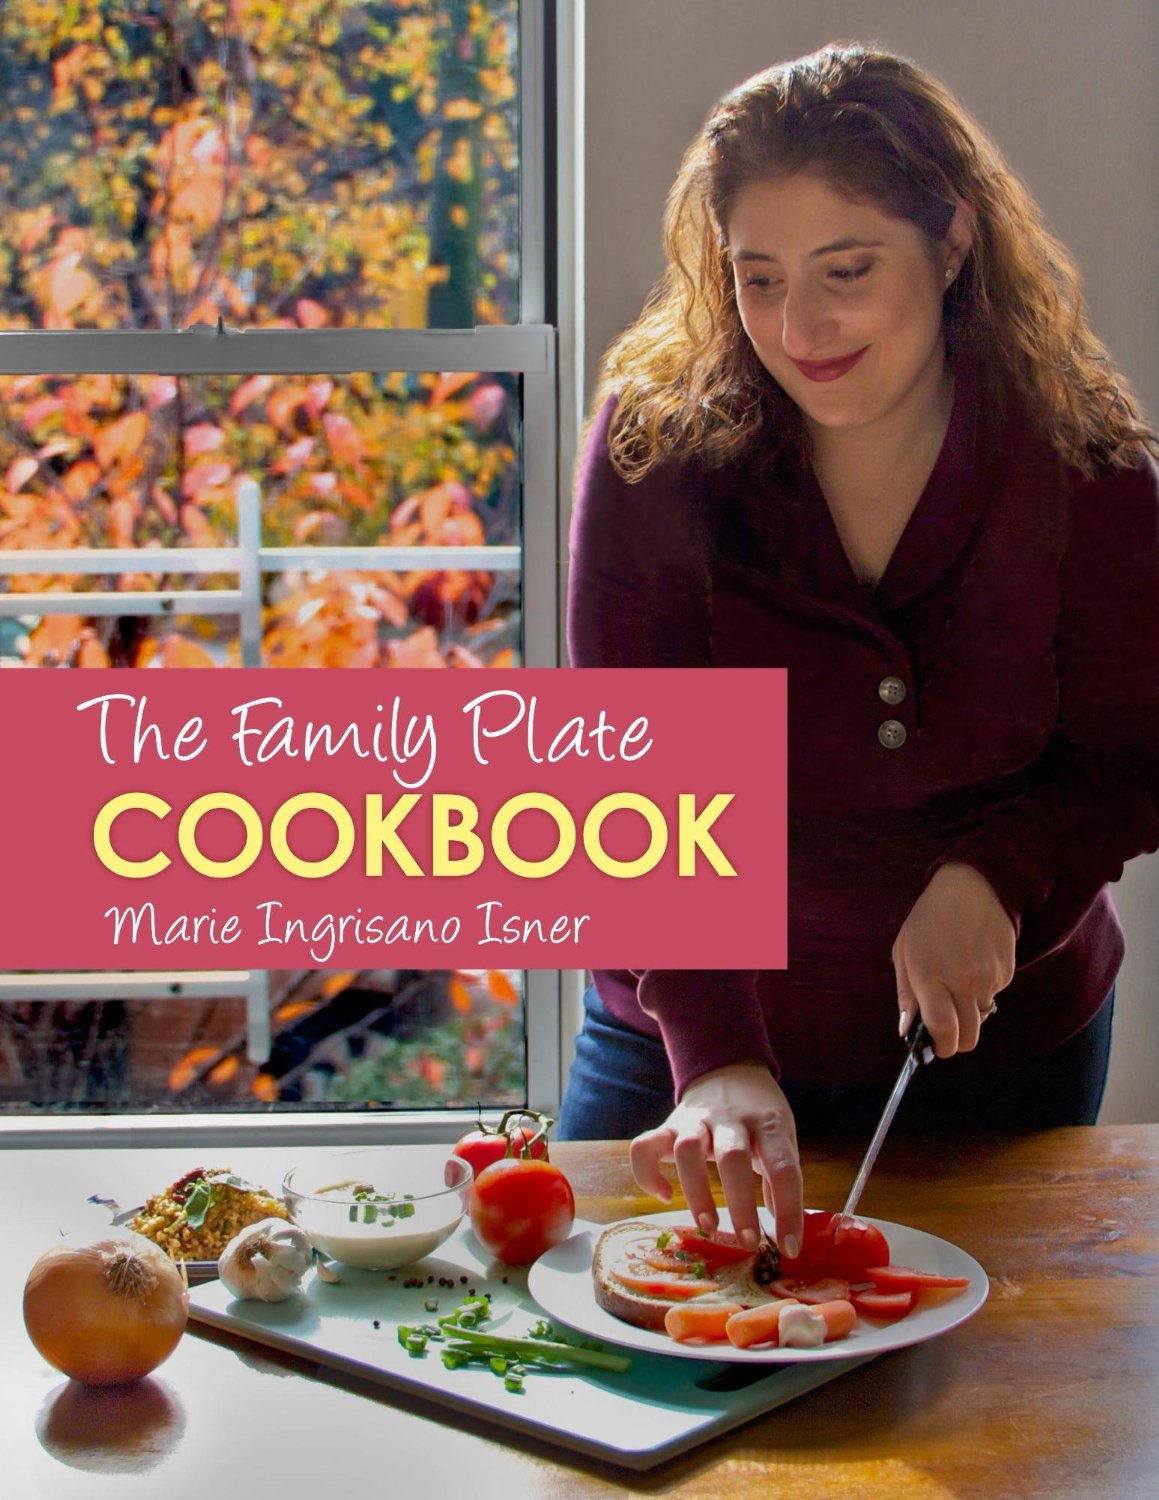 The Family Plate Cookbook